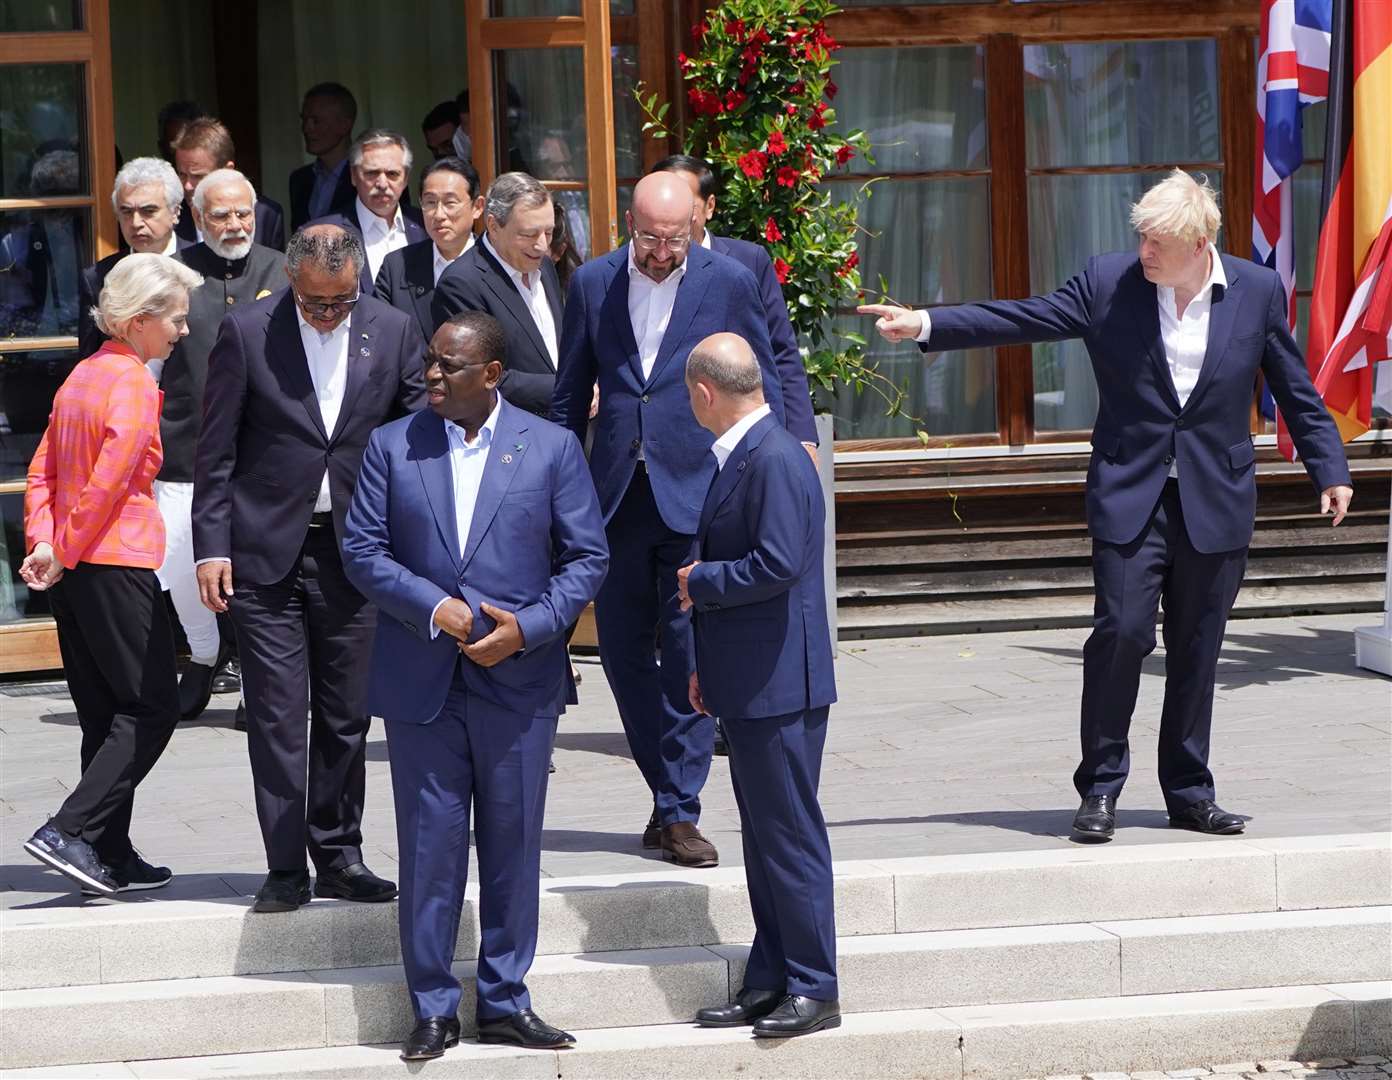 Prime Minister Boris Johnson (right) with other leaders from the G7 and partner countries during an extended family photo at Schloss Elmau in the Bavarian Alps (Stefan Rousseau/PA)